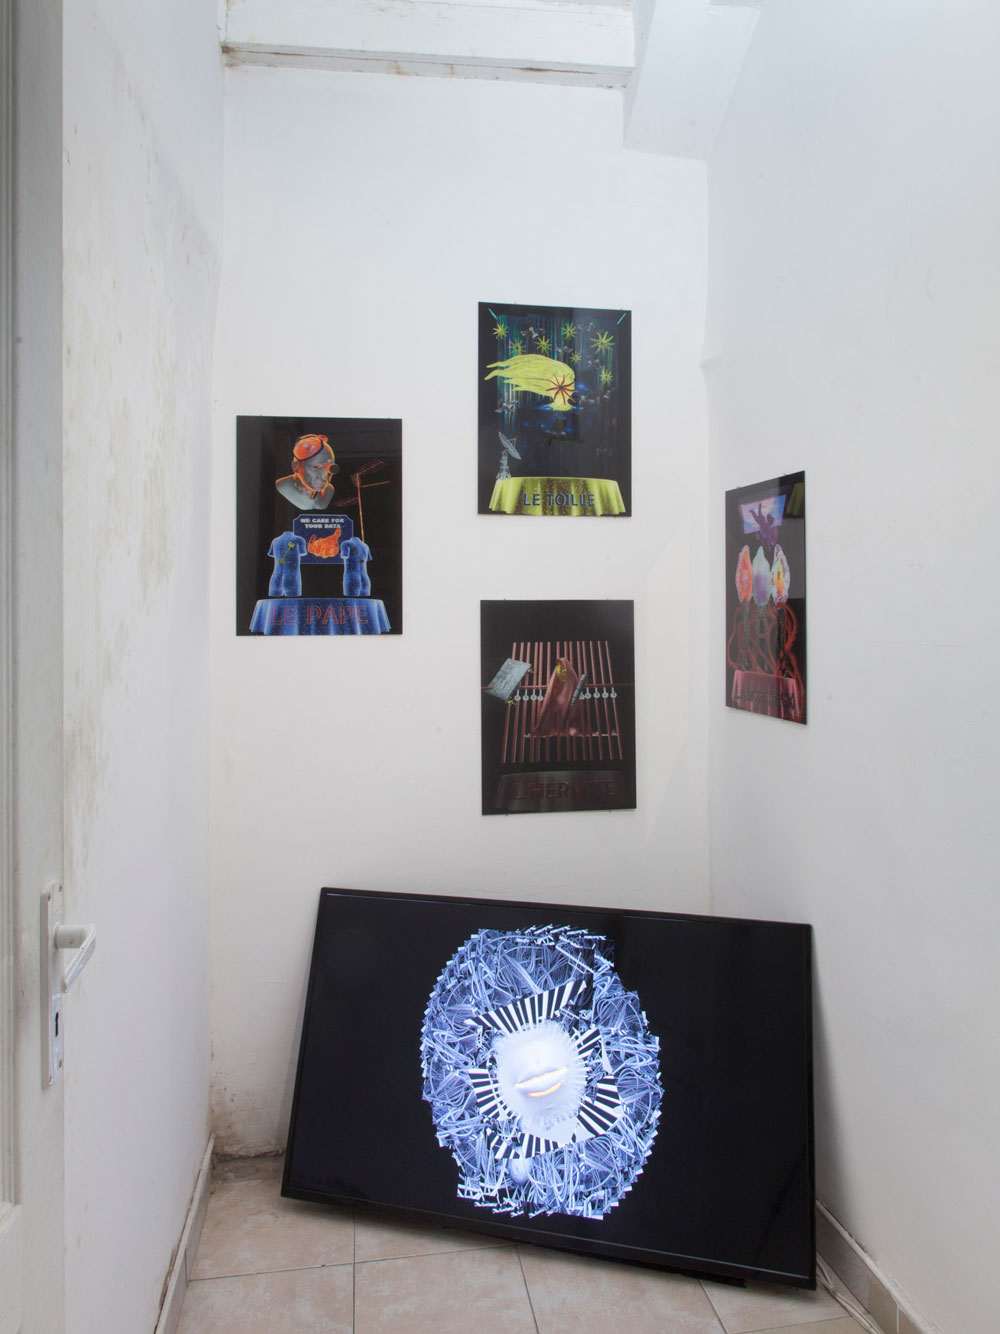 @Aici Acolo Pop Up Gallery, 'At The Center of The World There is a Fiction'; Cluj-Napoca, 2020; Photo Credits: Aici Acolo Pop Up Gallery. Courtesy of Aici Acolo Pop Up Gallery